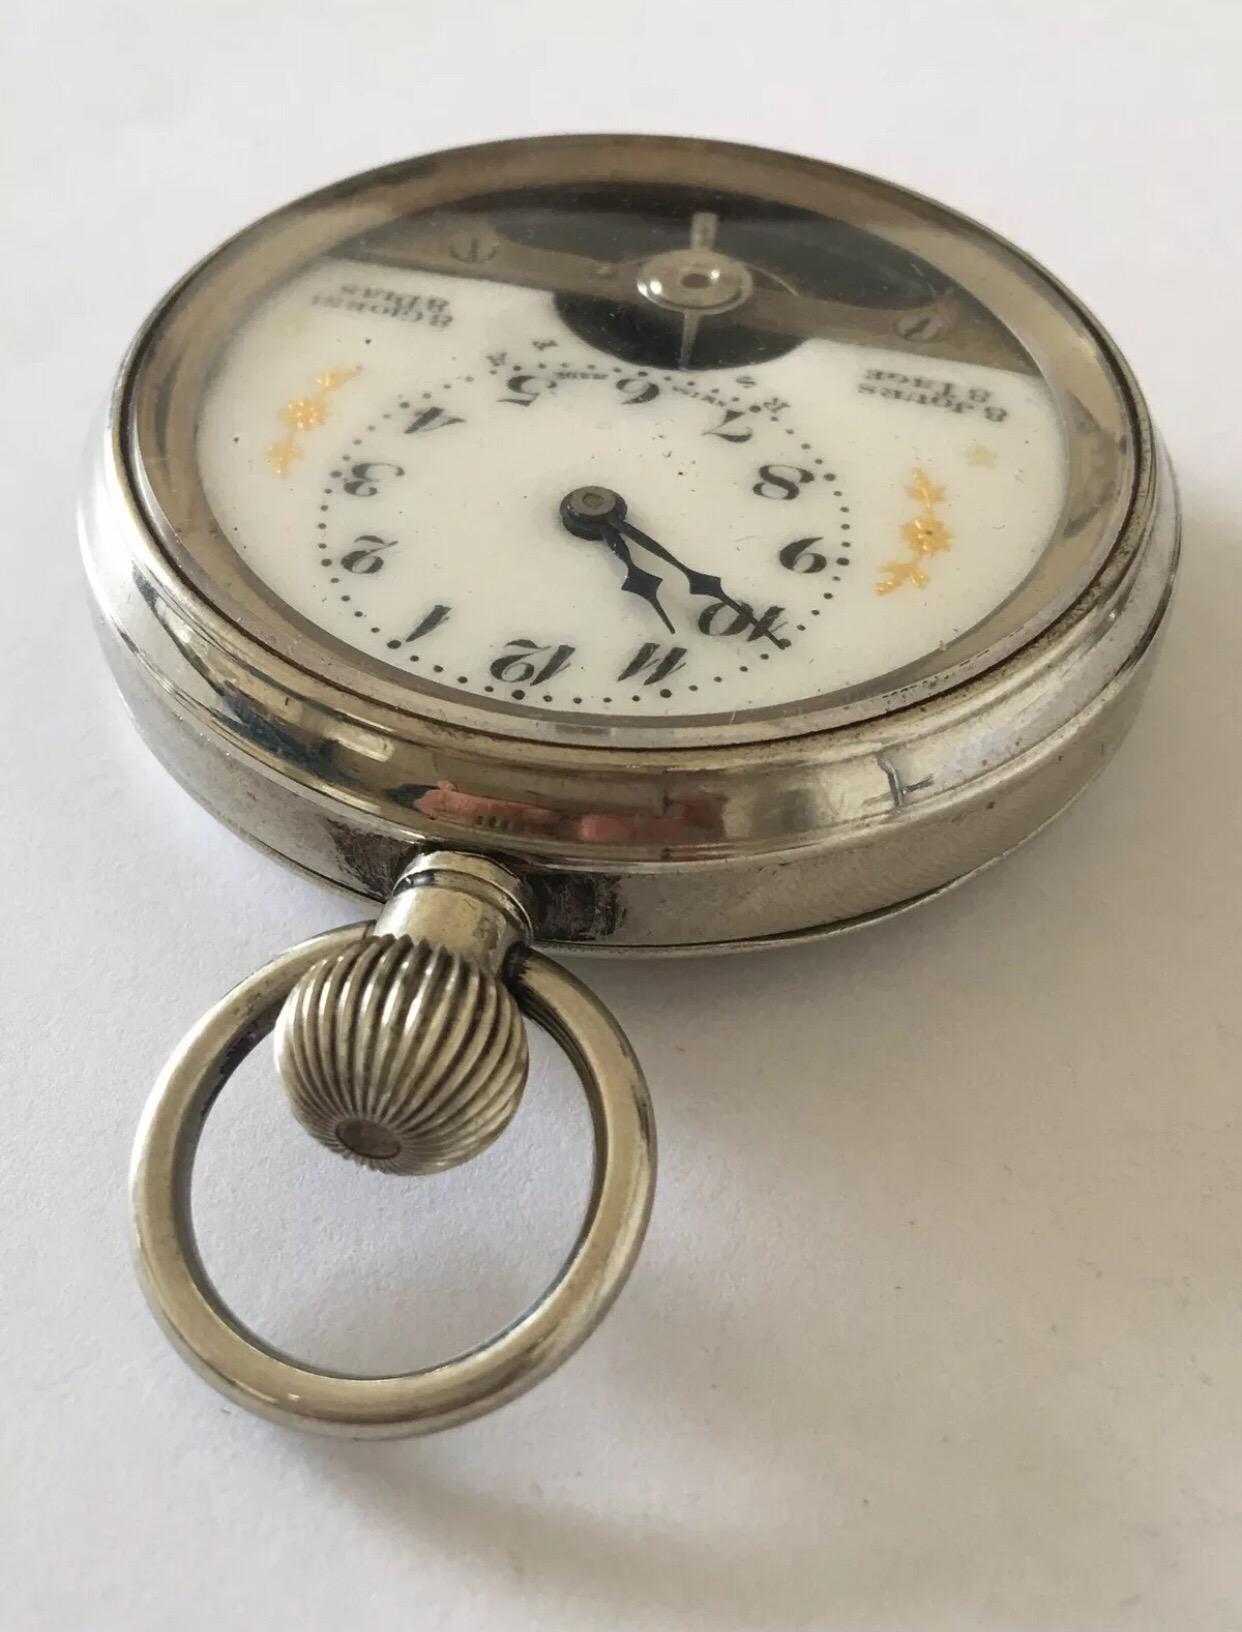 Antique 8 Day Swiss Made Hebdomas Nickel Pocket Watch.
This watch is working and ticking well. However, I cannot guarantee the time accuracy due to its age.